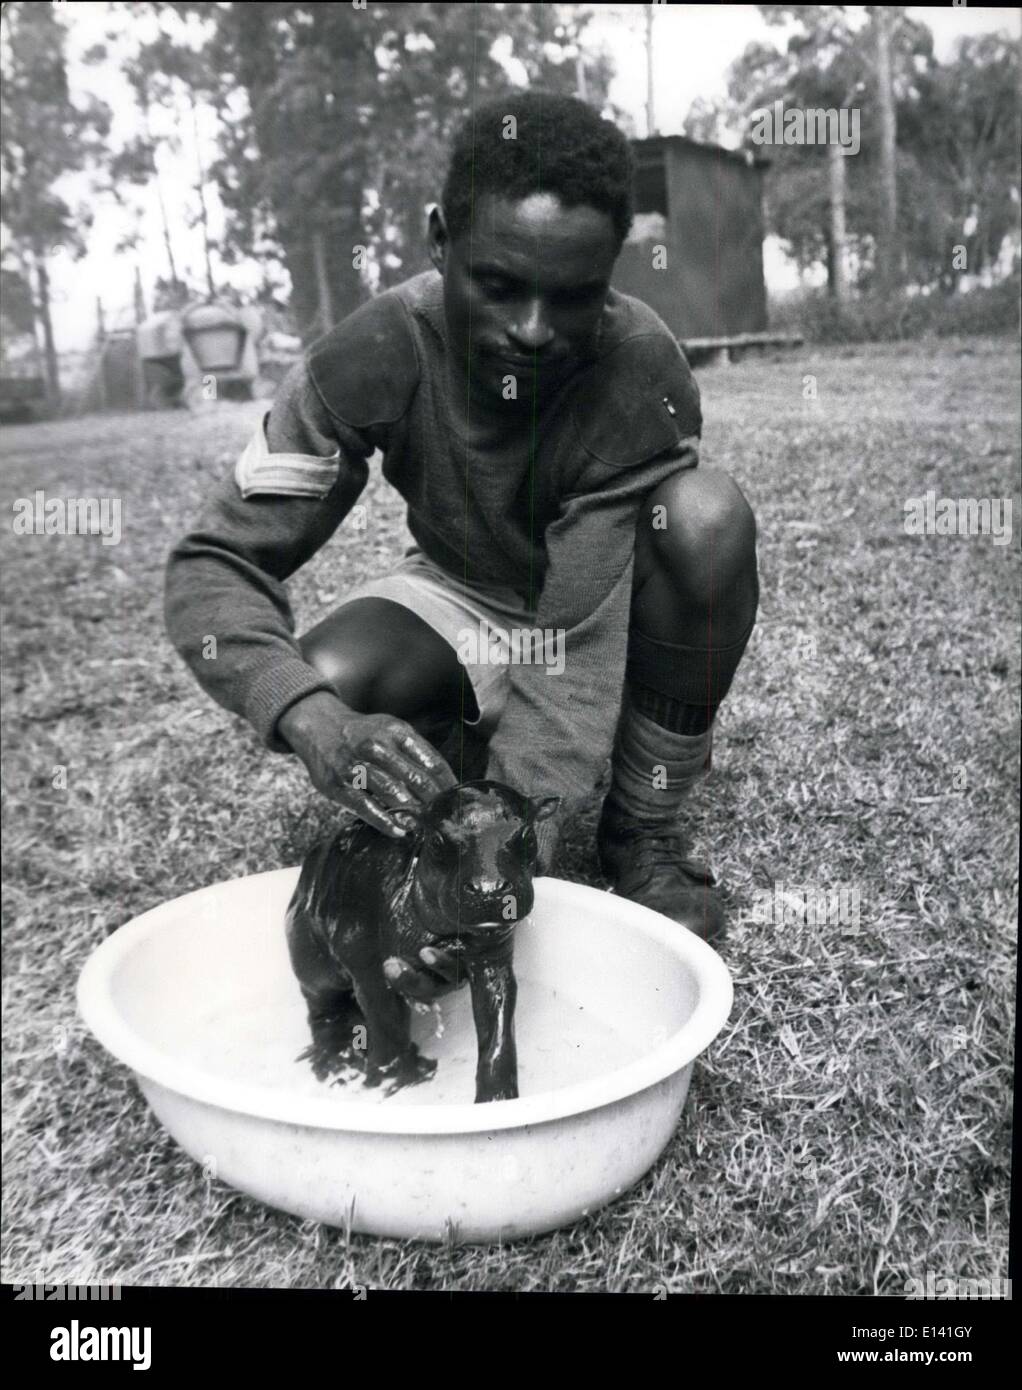 Mar. 31, 2012 - An Orphanage Ranger gives a daily morning bath to the little pigmy. Stock Photo